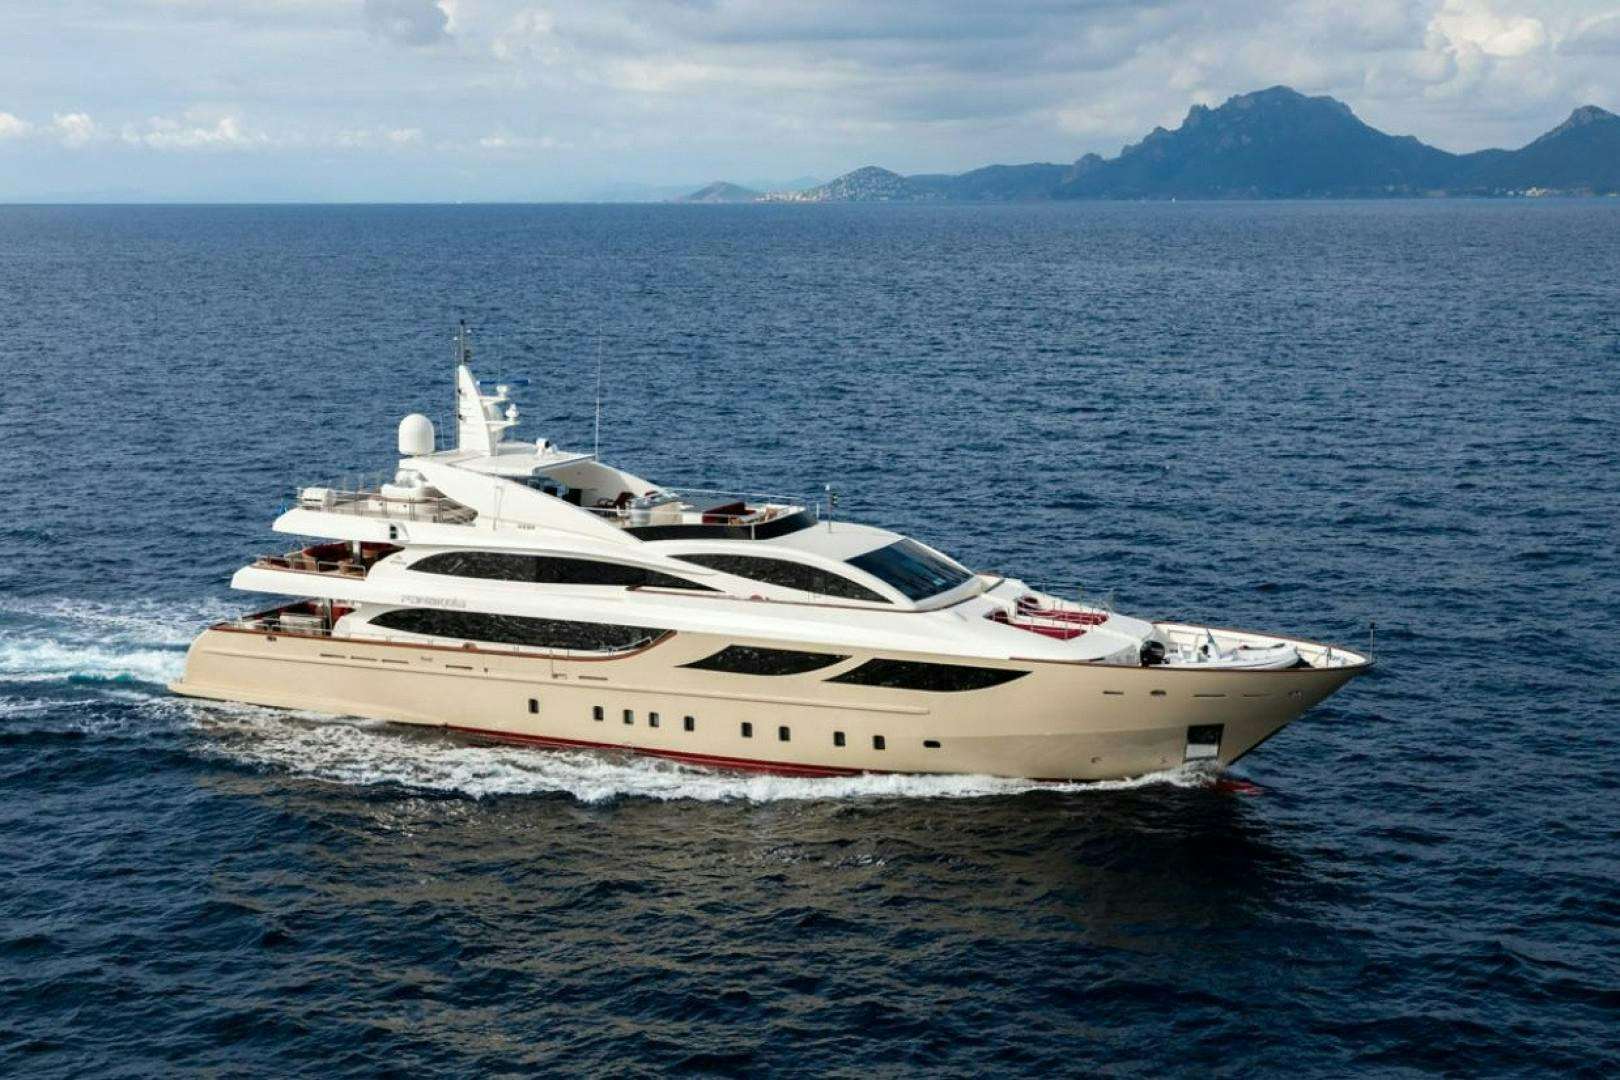 Watch Video for PANAKEIA Yacht for Sale